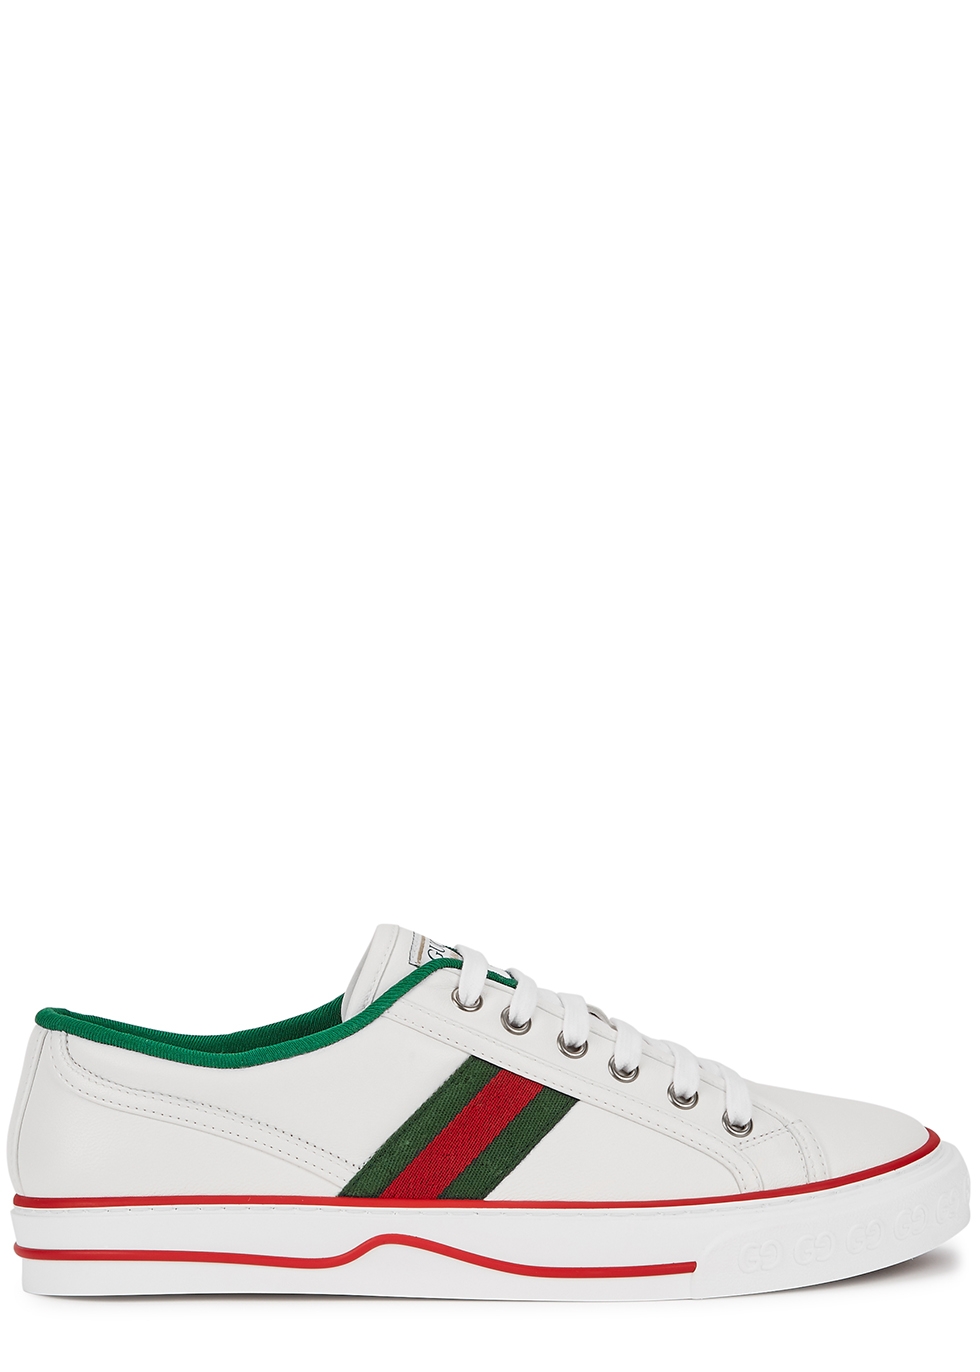 Gucci Tennis 1977 white leather sneakers - Harvey Nichols